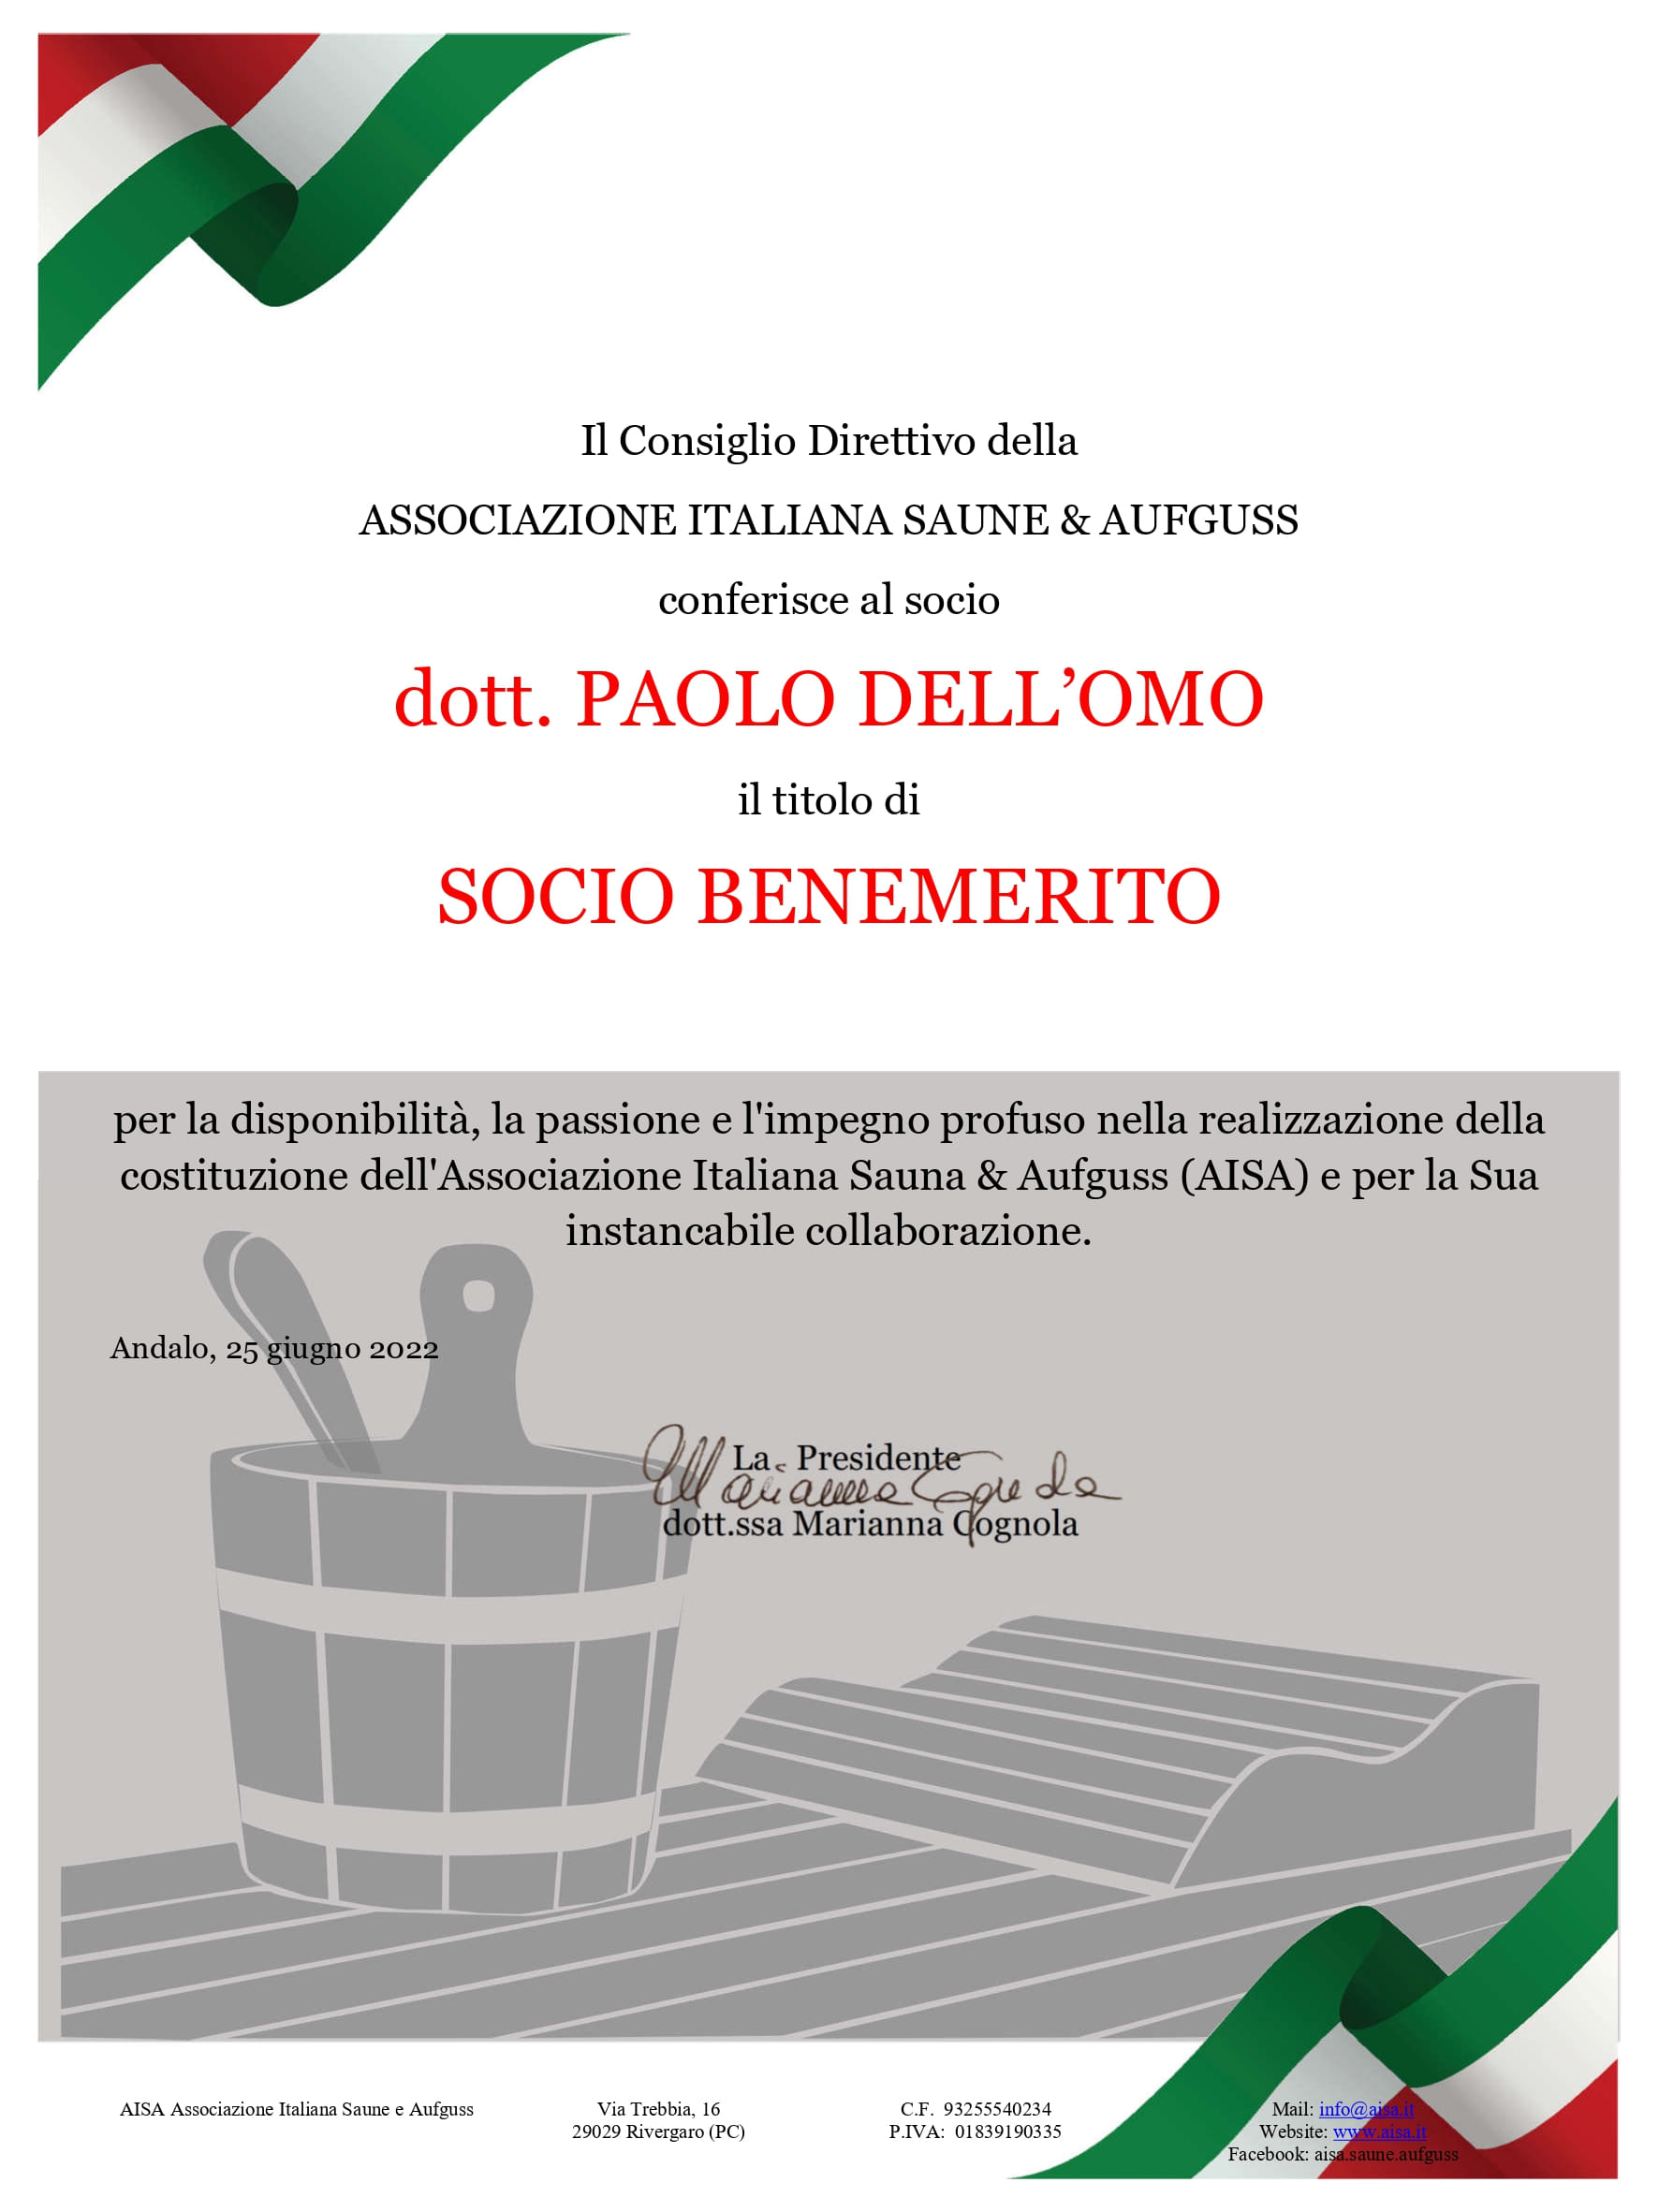 Certificate of Meritorious Member to Paolo Dell’Omo